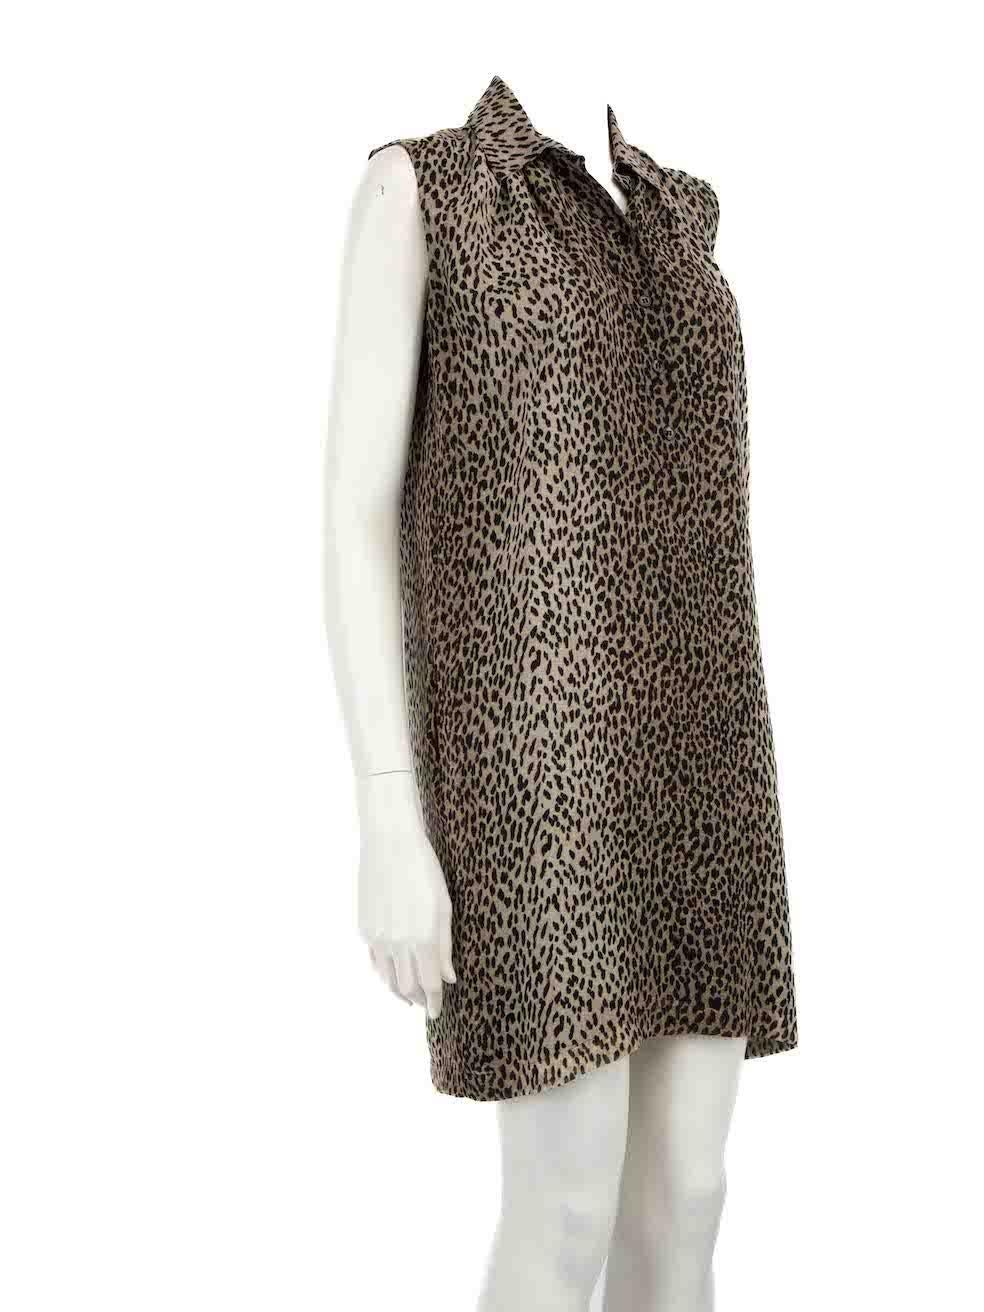 CONDITION is Very good. Hardly any visible wear to dress is evident on this used Saint Laurent designer resale item.
 
 Details
 Brown
 Silk
 Dress
 Leopard print
 Sleeveless
 Knee length
 Button up fastening
 
 
 Made in Italy
 
 Composition
 100%